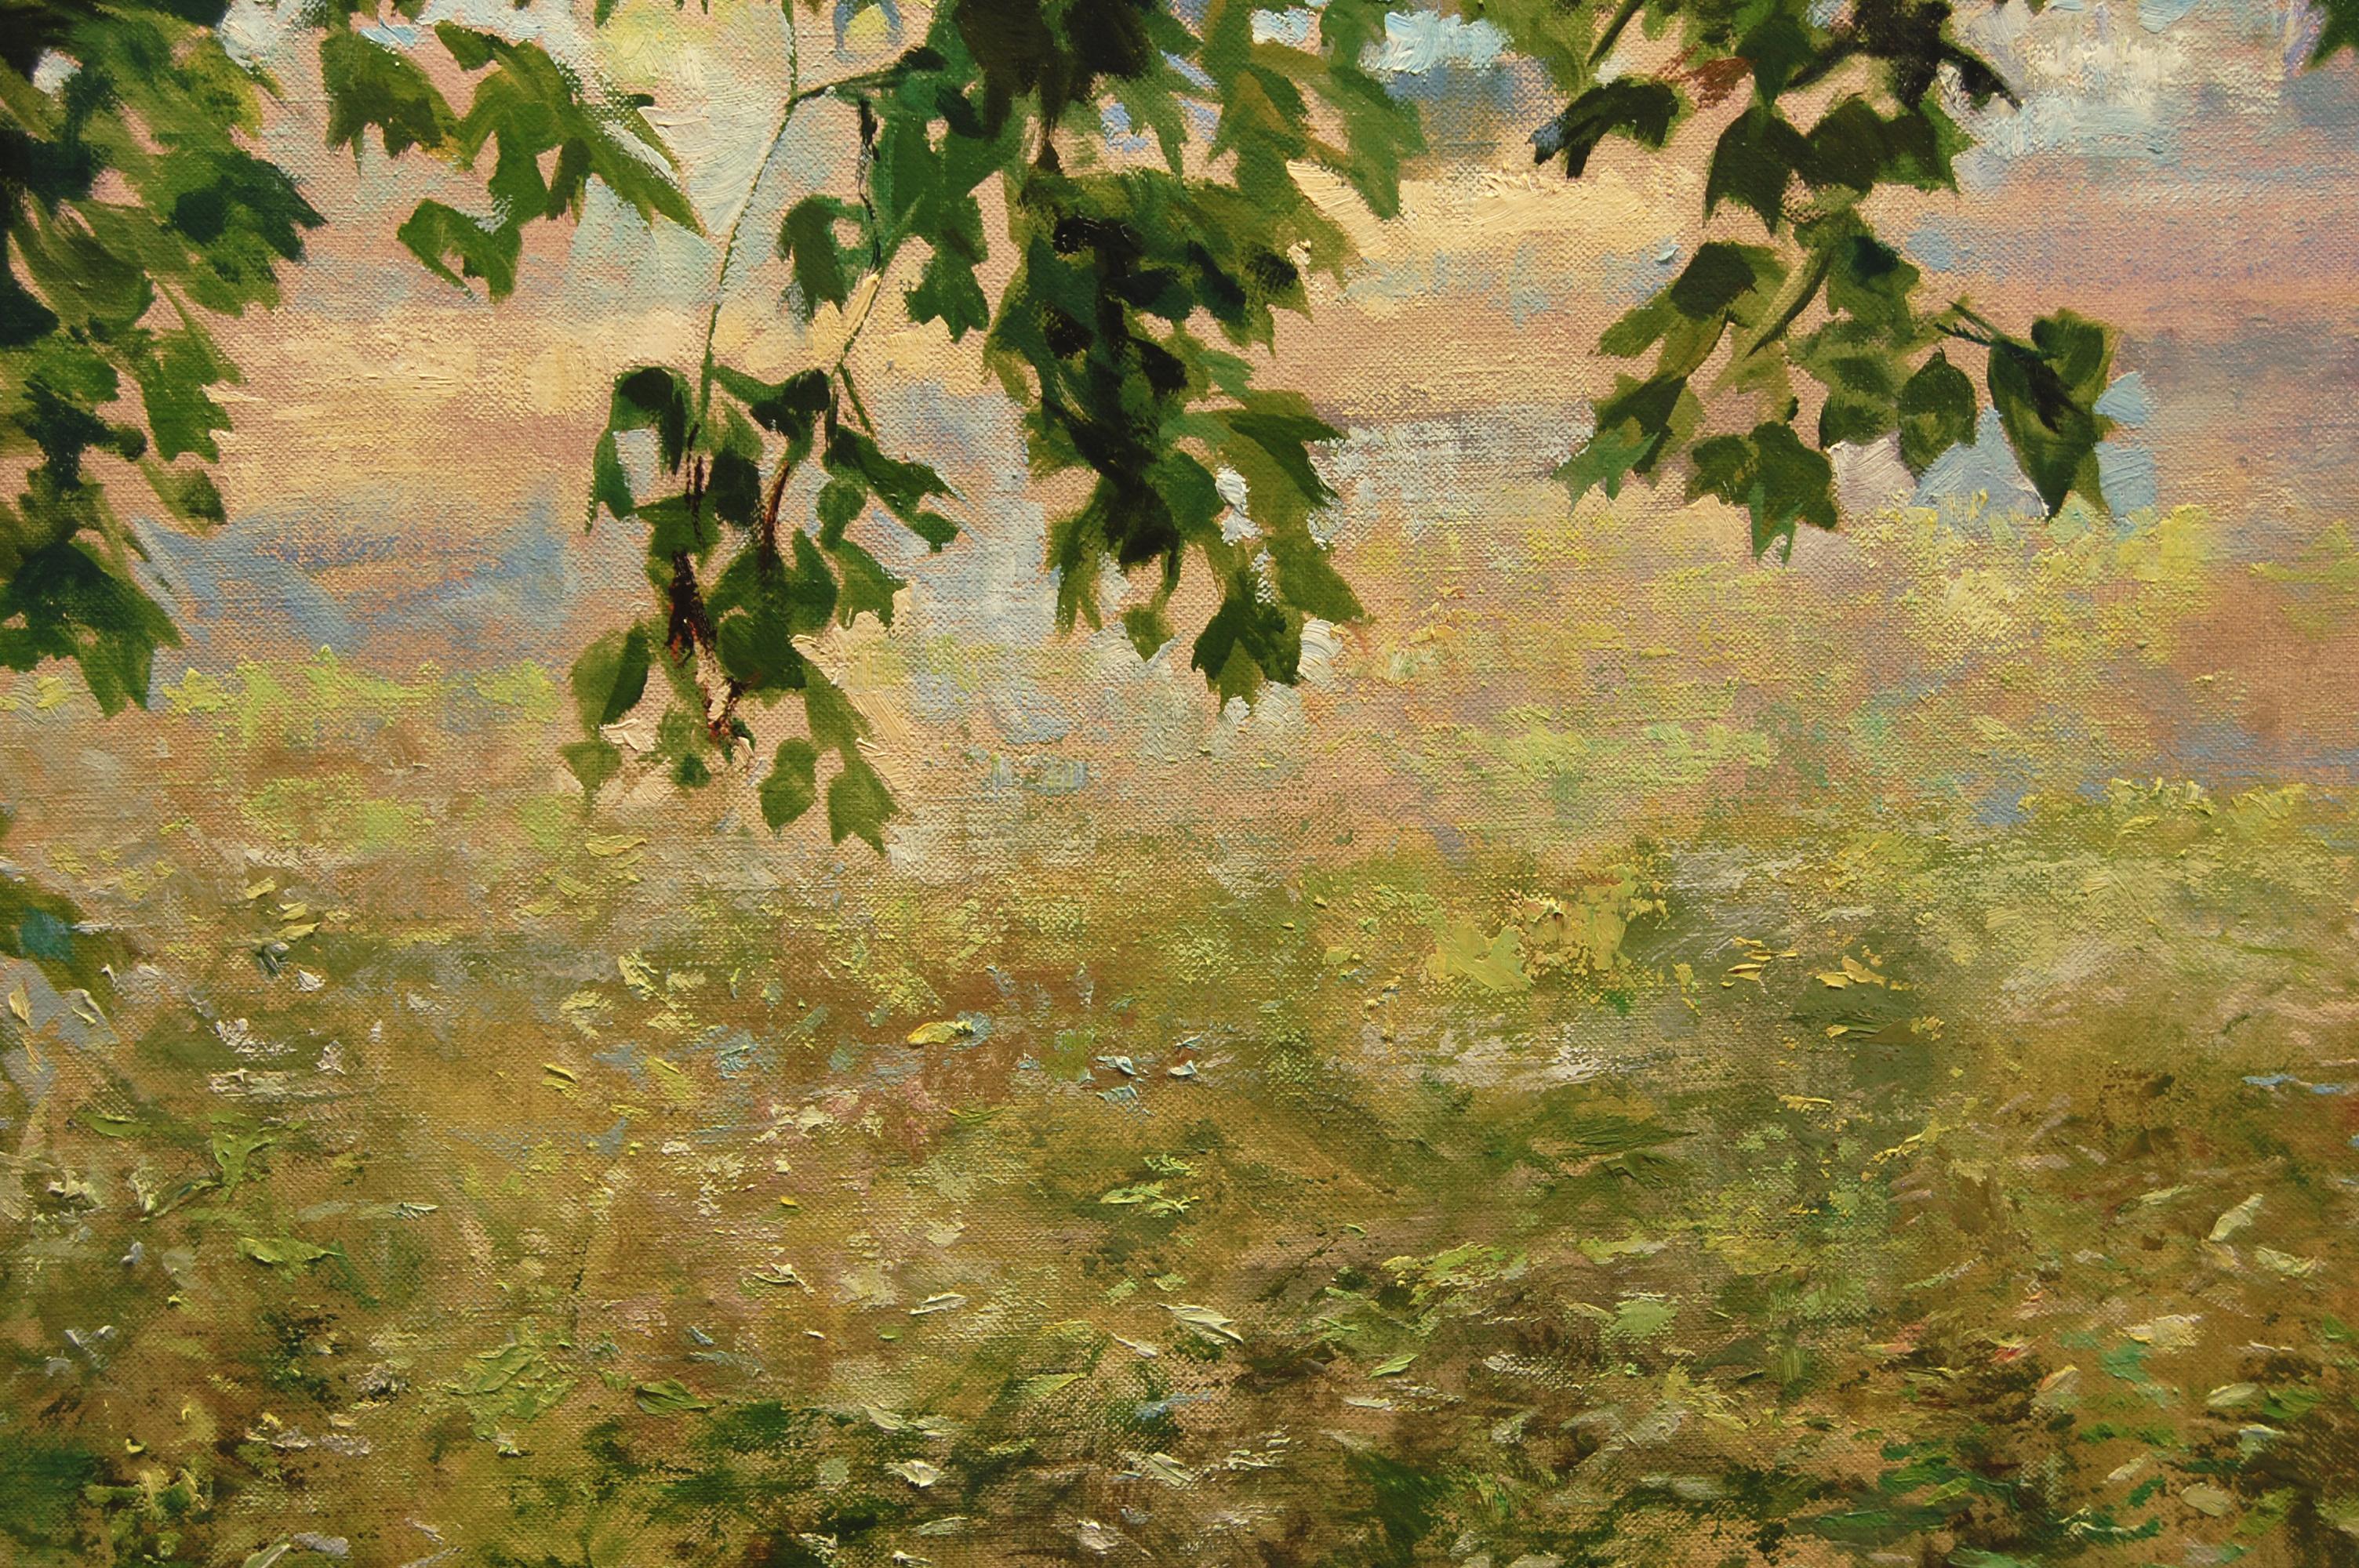 <p>Artist Comments<br>Artist Onelio Marrero often goes for walks where he can be surrounded by nature. In this painting, Onelio wanted to convey the sense of being sheltered under the canopy and rustling leaves of a trident maple tree. By